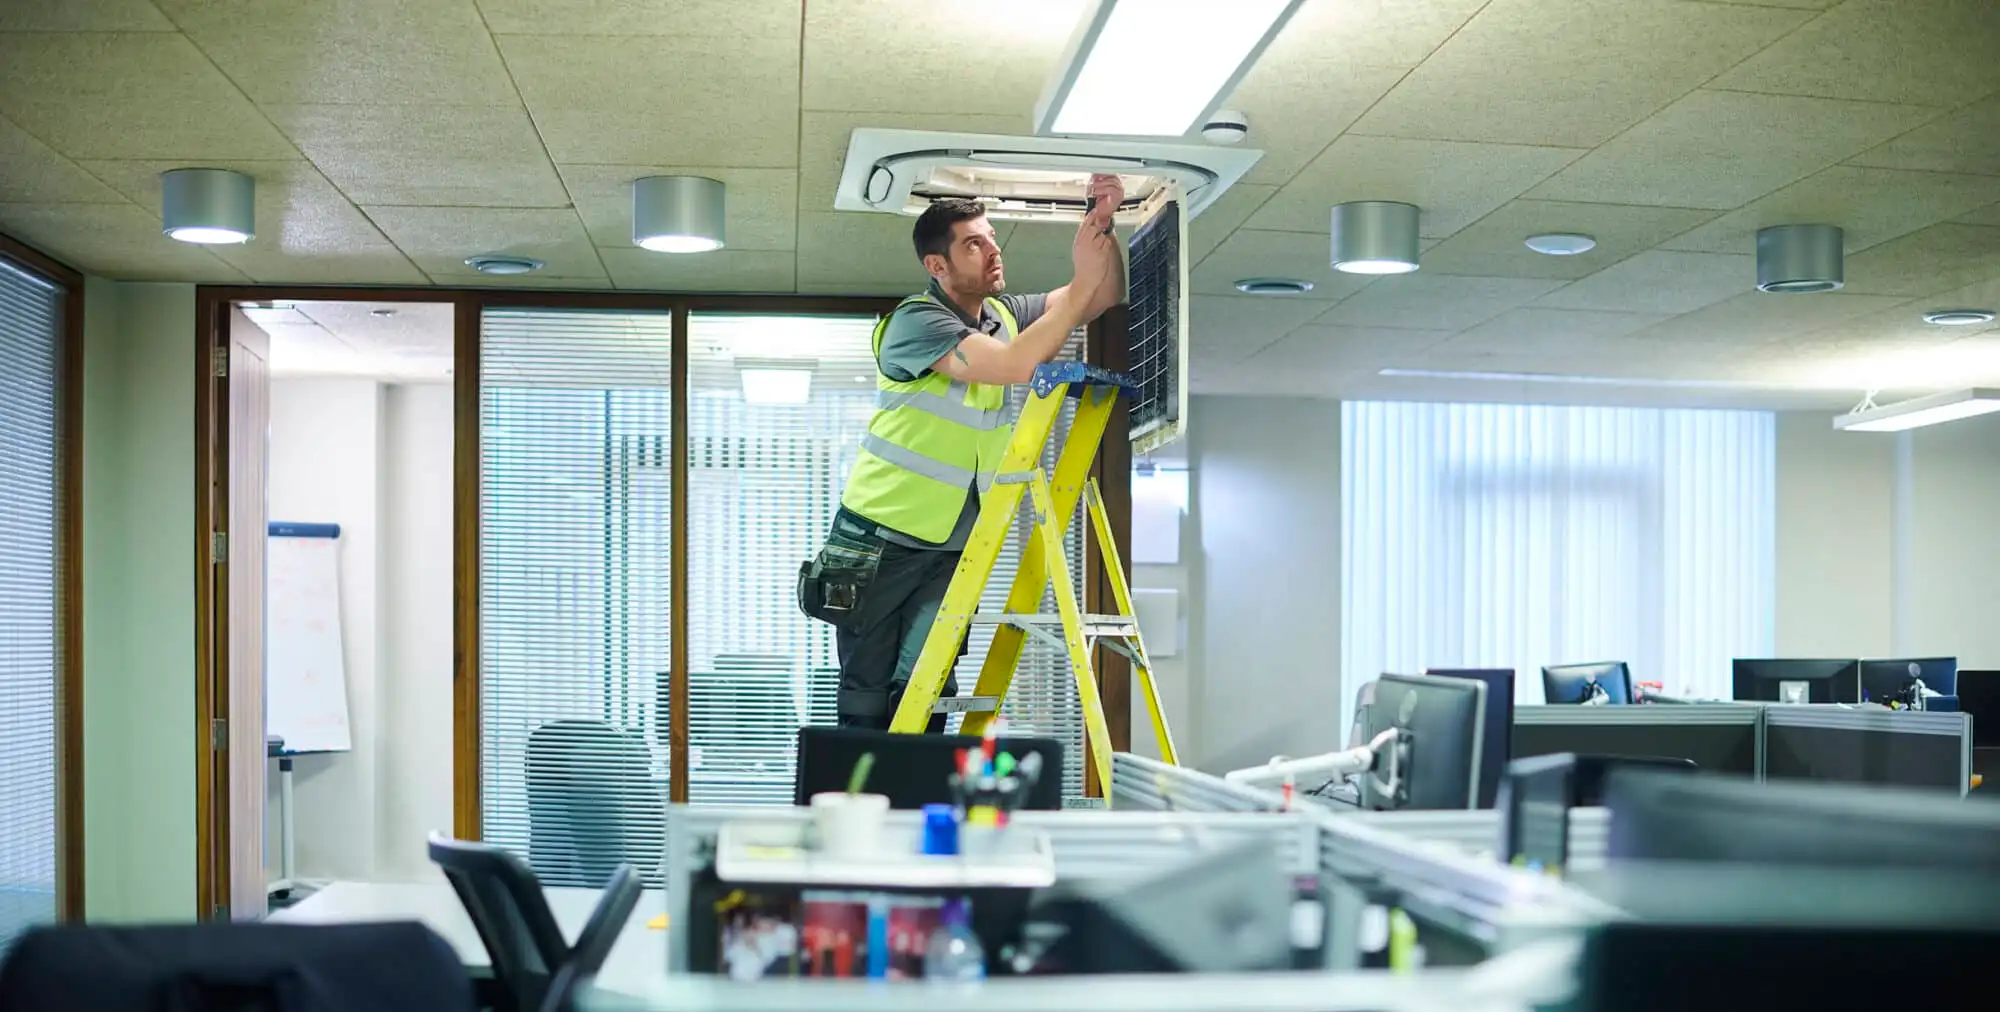 Maintenance technician works on HVAC system in an office.